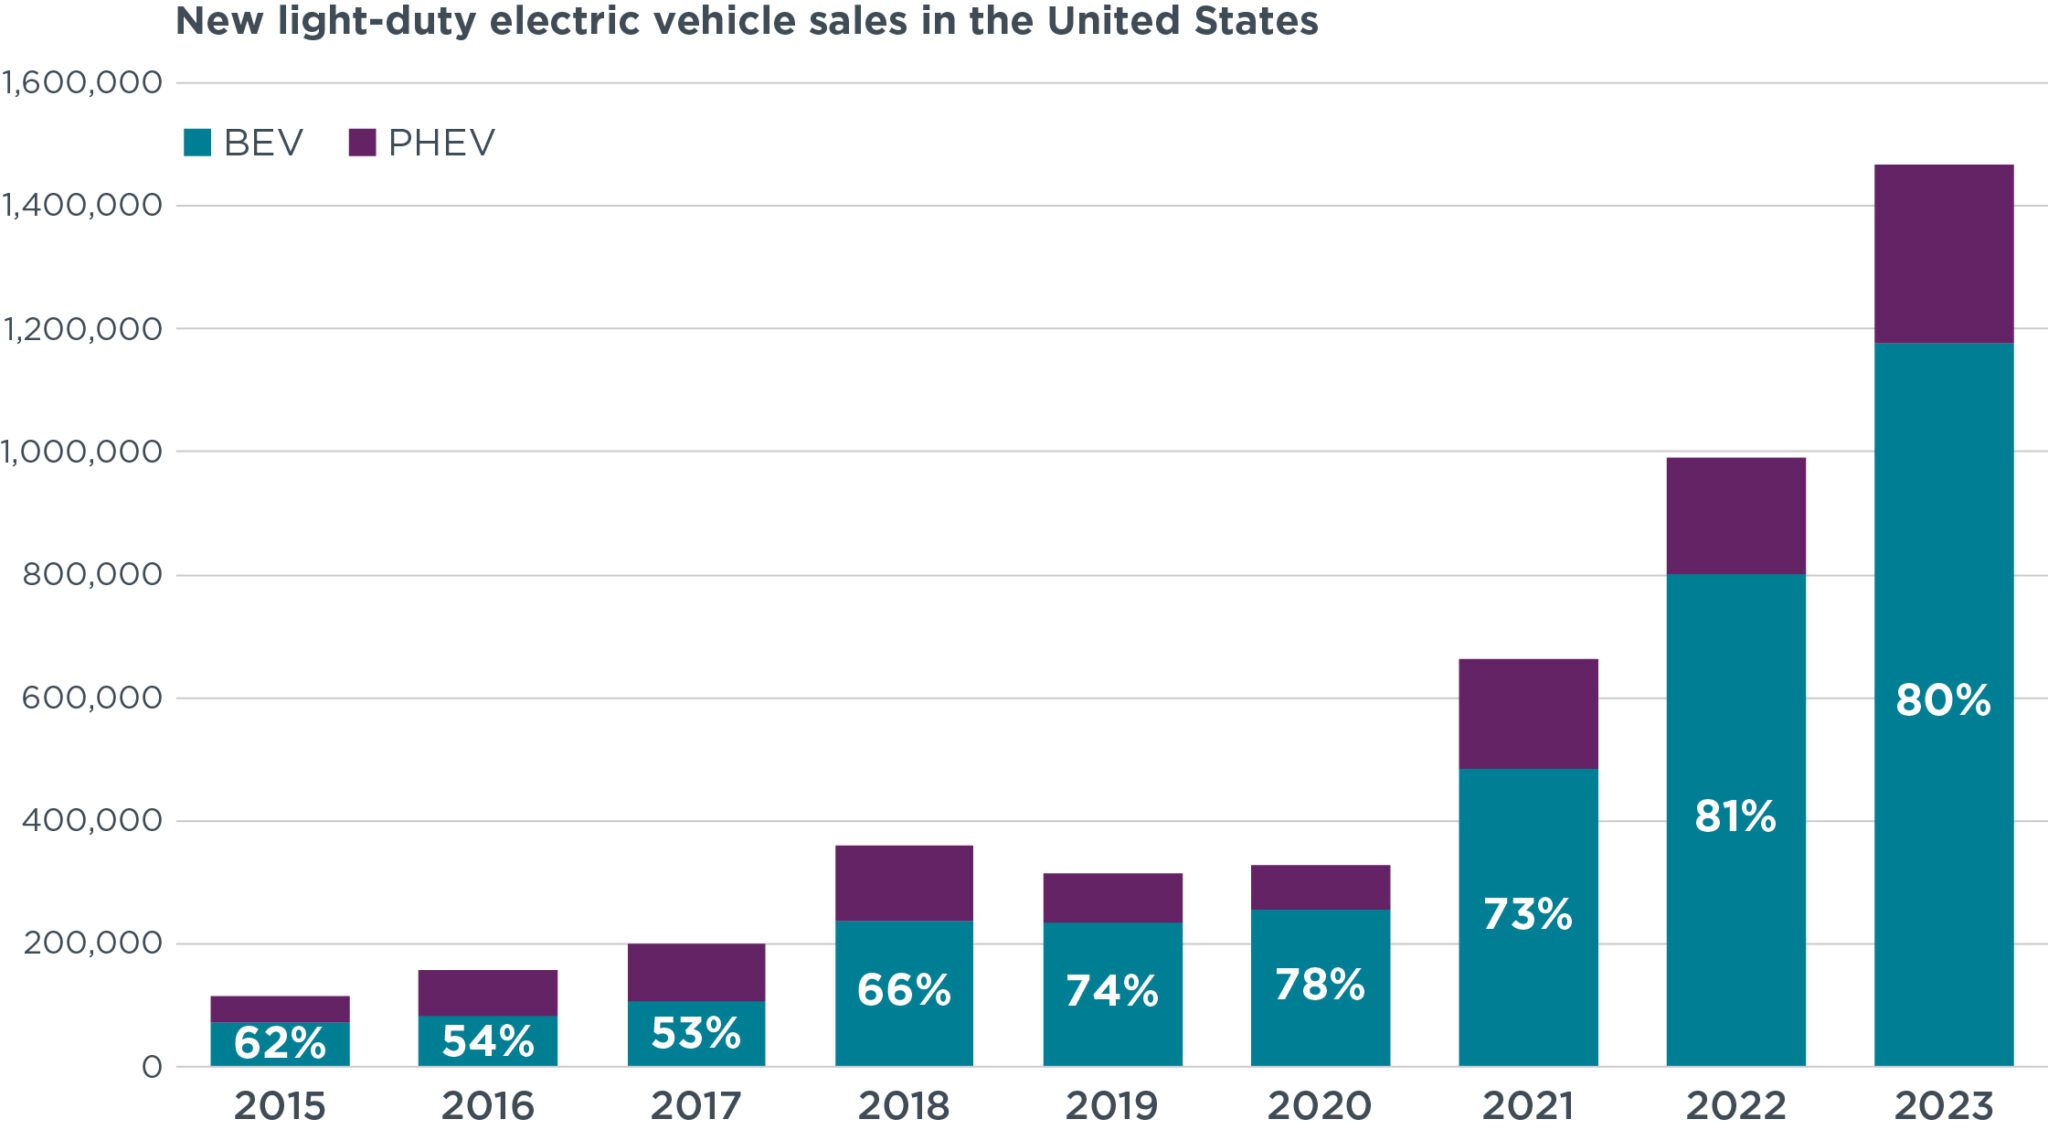 New light-duty BEV and PHEV sales in the United States from 2015–2023, with the percentage of BEV sales labeled.